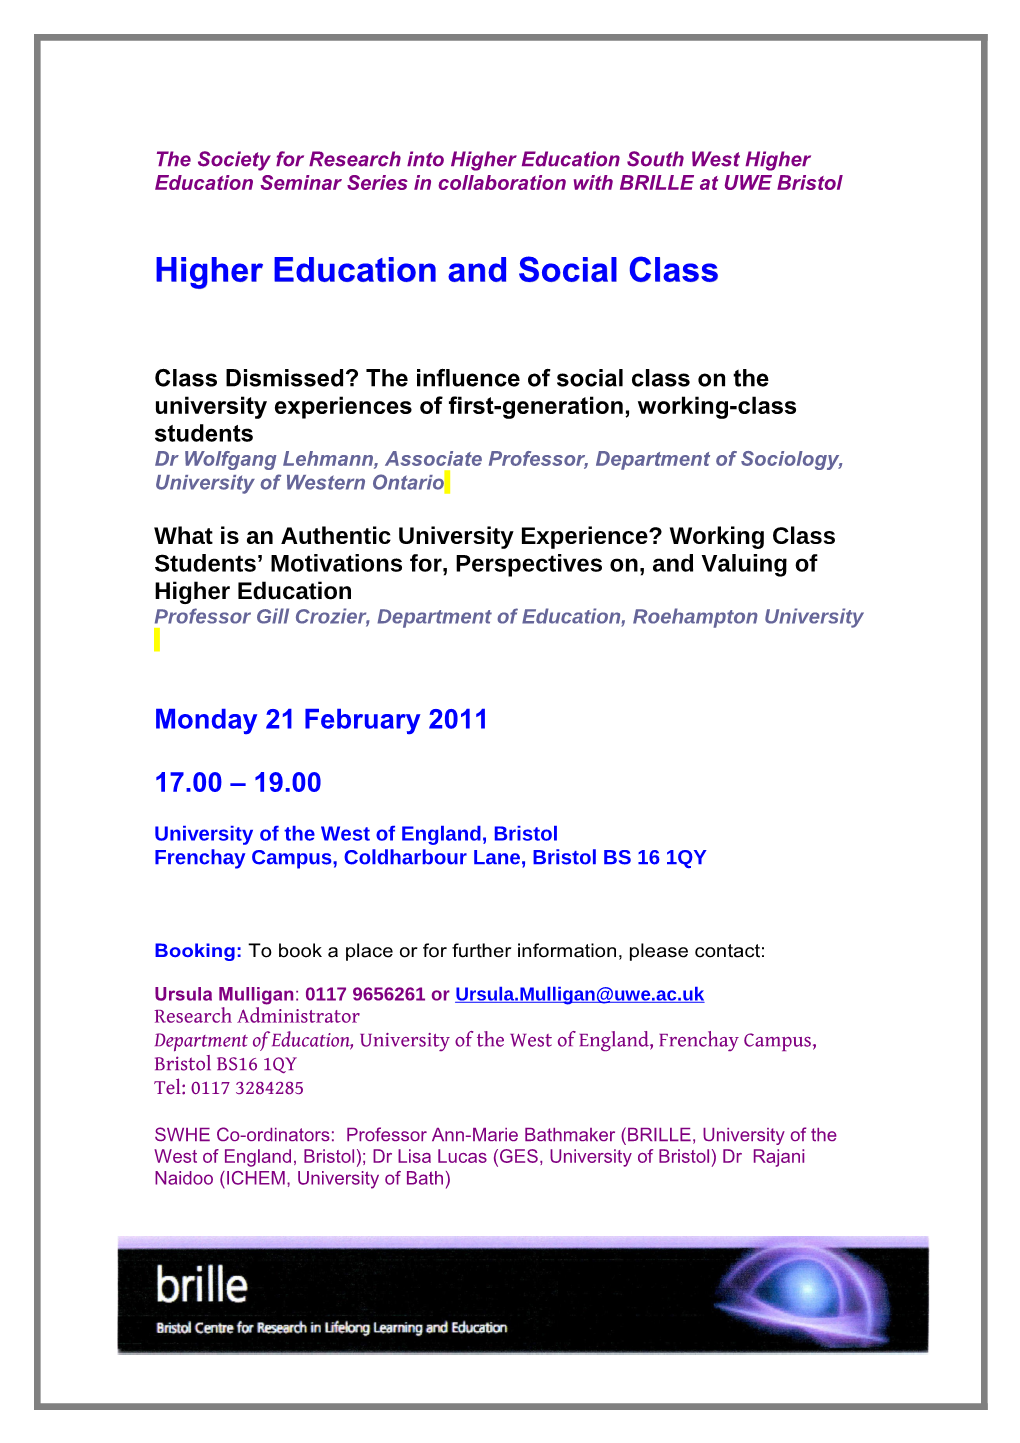 The Society for Research Into Higher Education South West Higher Education Seminar Series